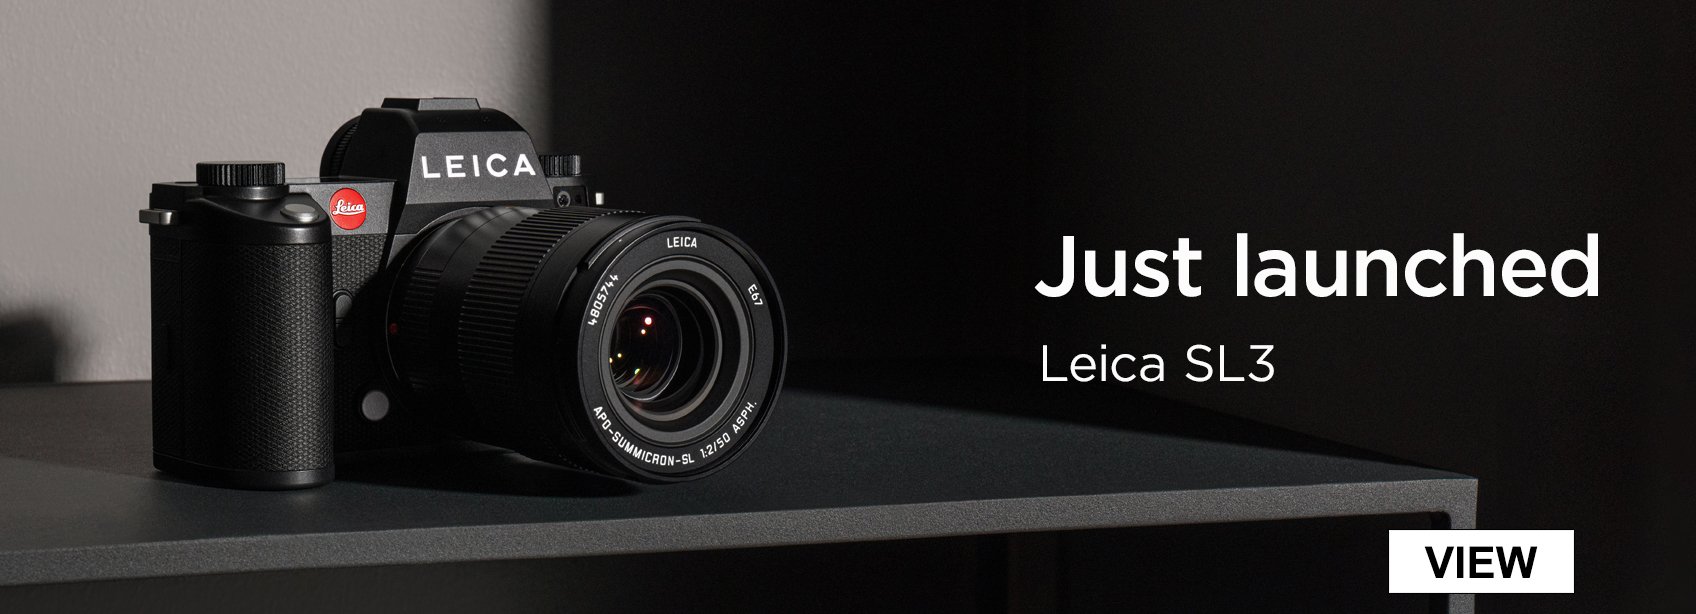 Just launched Leica SL3